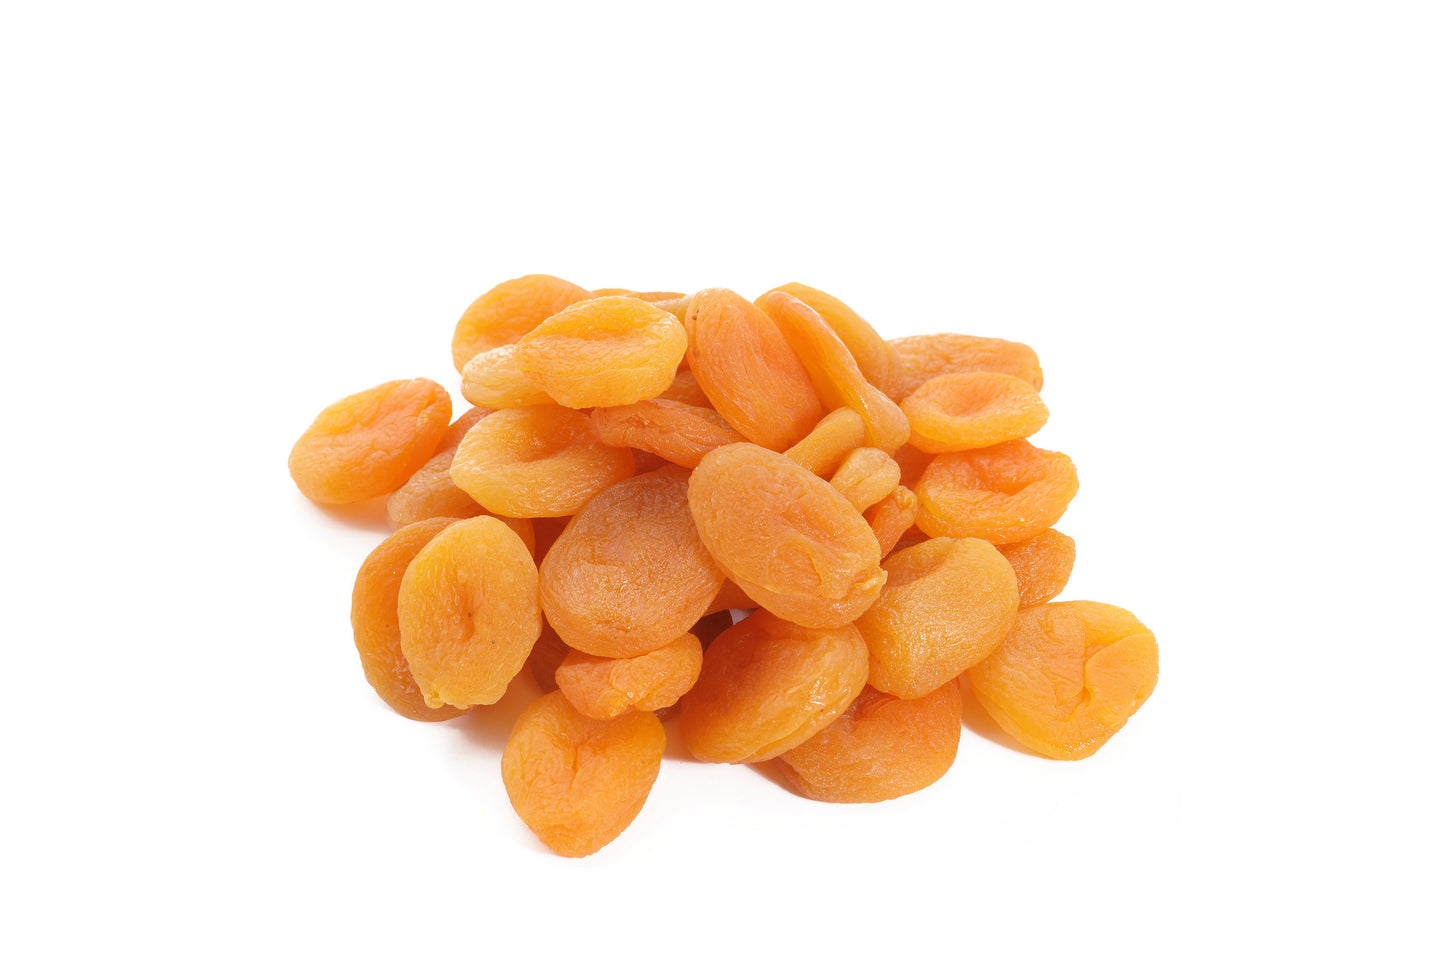 DRIED APRICOTS